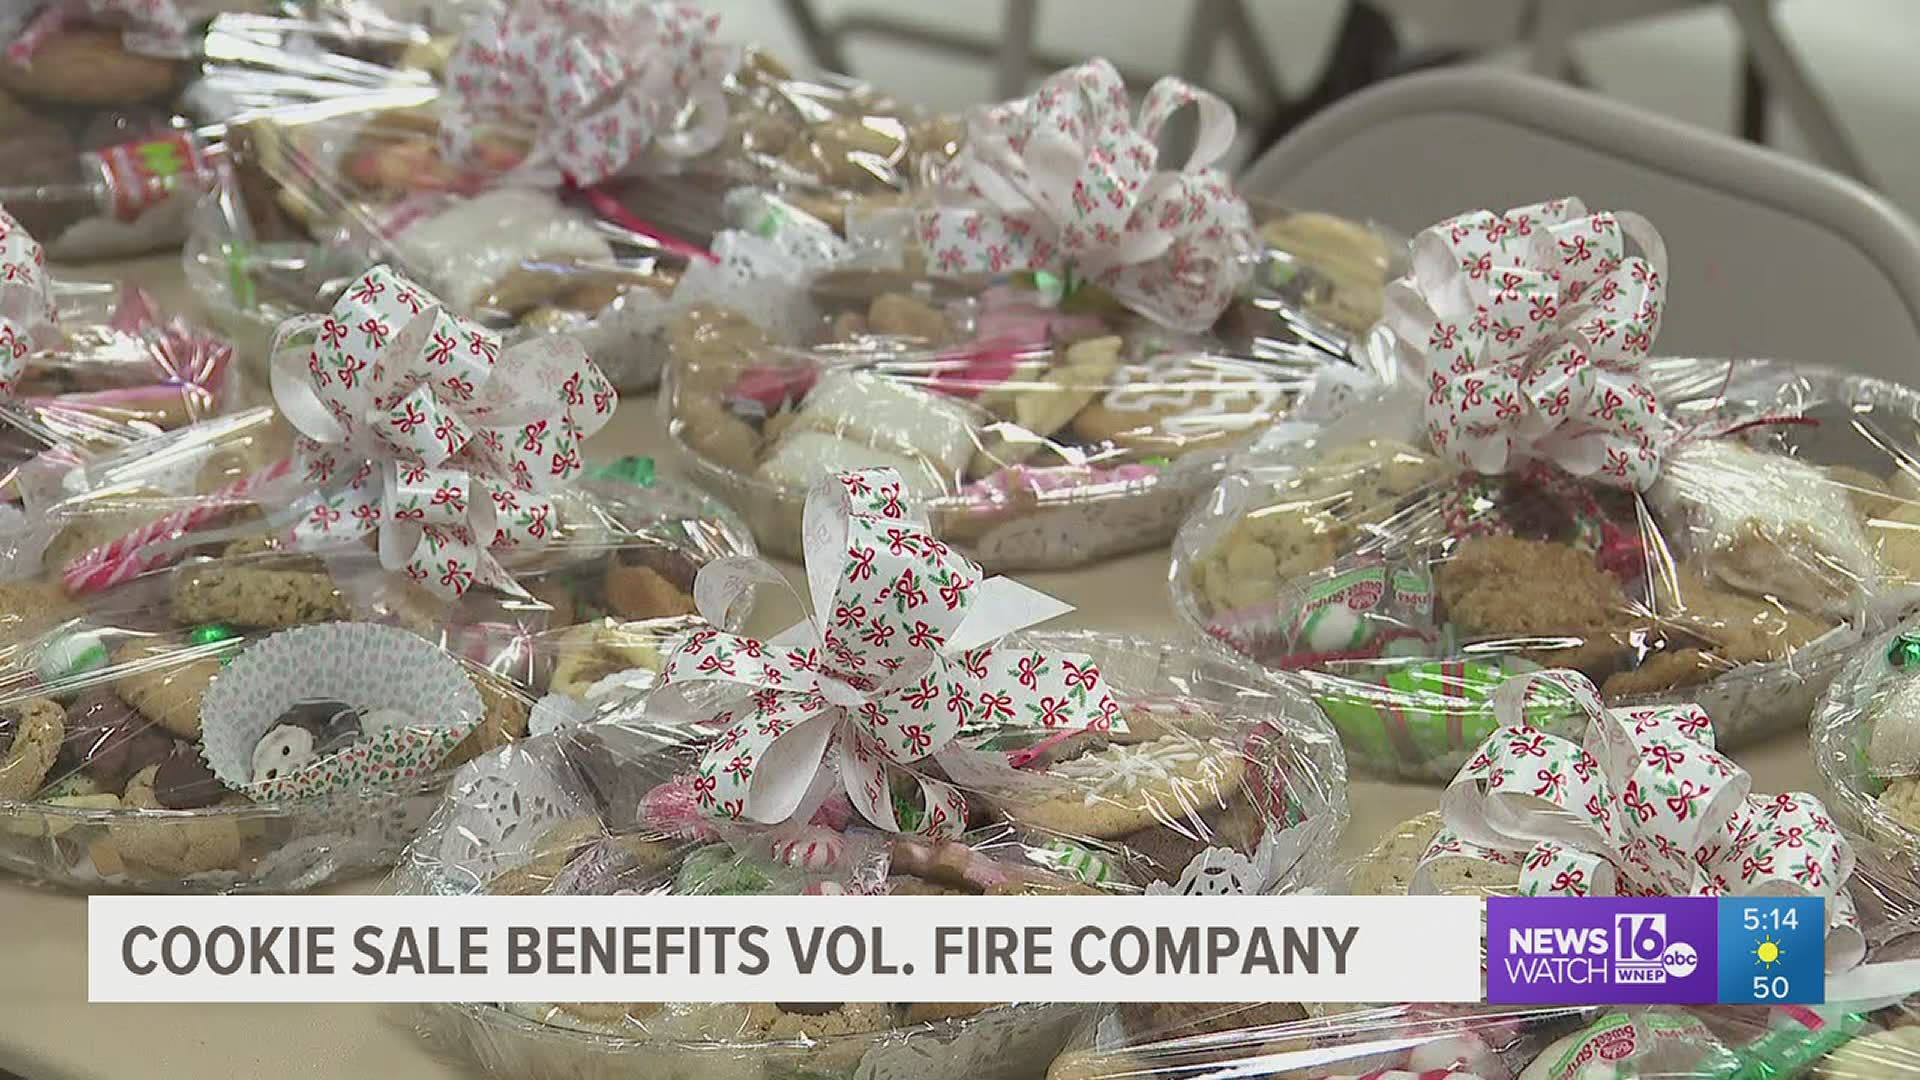 Folks with the Franklin Township Volunteer Fire Company in Carbon County are hoping to raise some cash and brighten spirits this season.